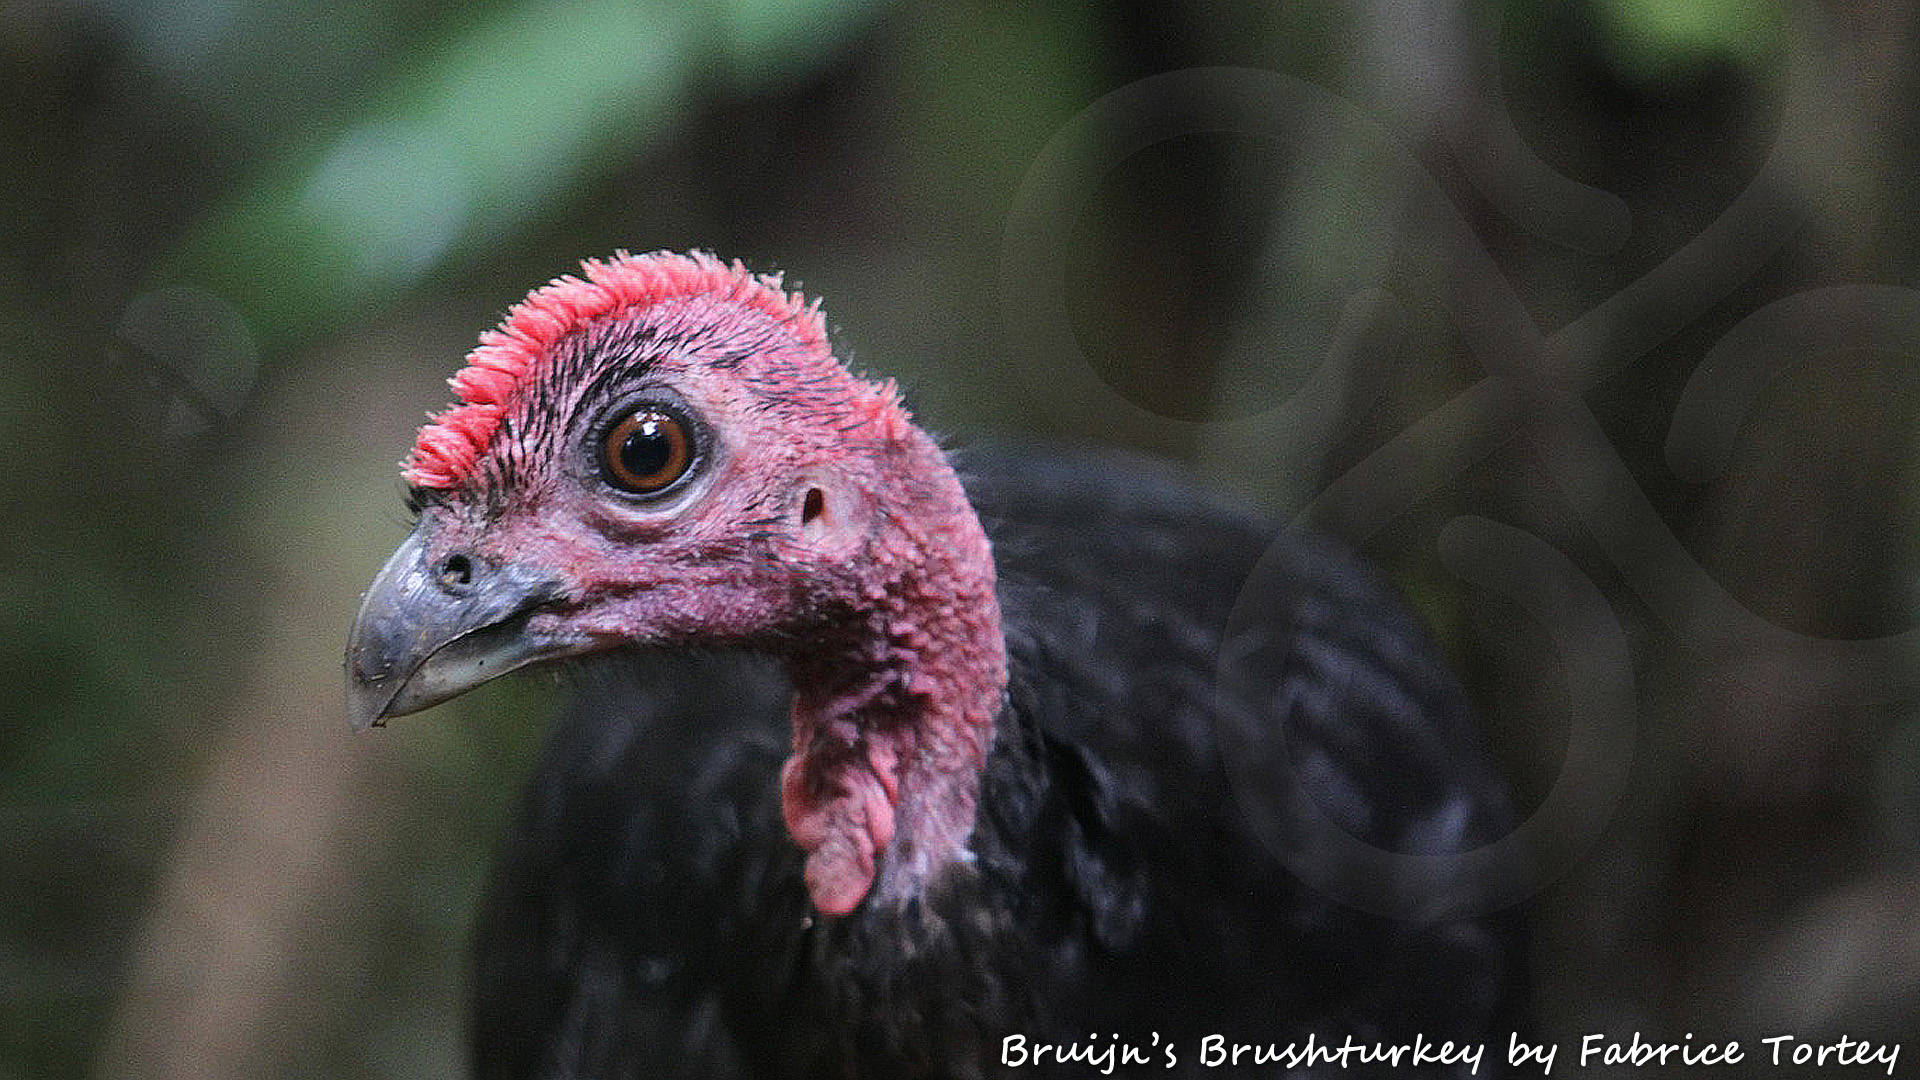 Bruijn's Brushturkey Aepypodius bruijnii is only known with certainty from the largest Raja Ampat island of Waigeo hence its alternative English name of Waigeo Brushturkey. Copyright © Fabrice Tortey